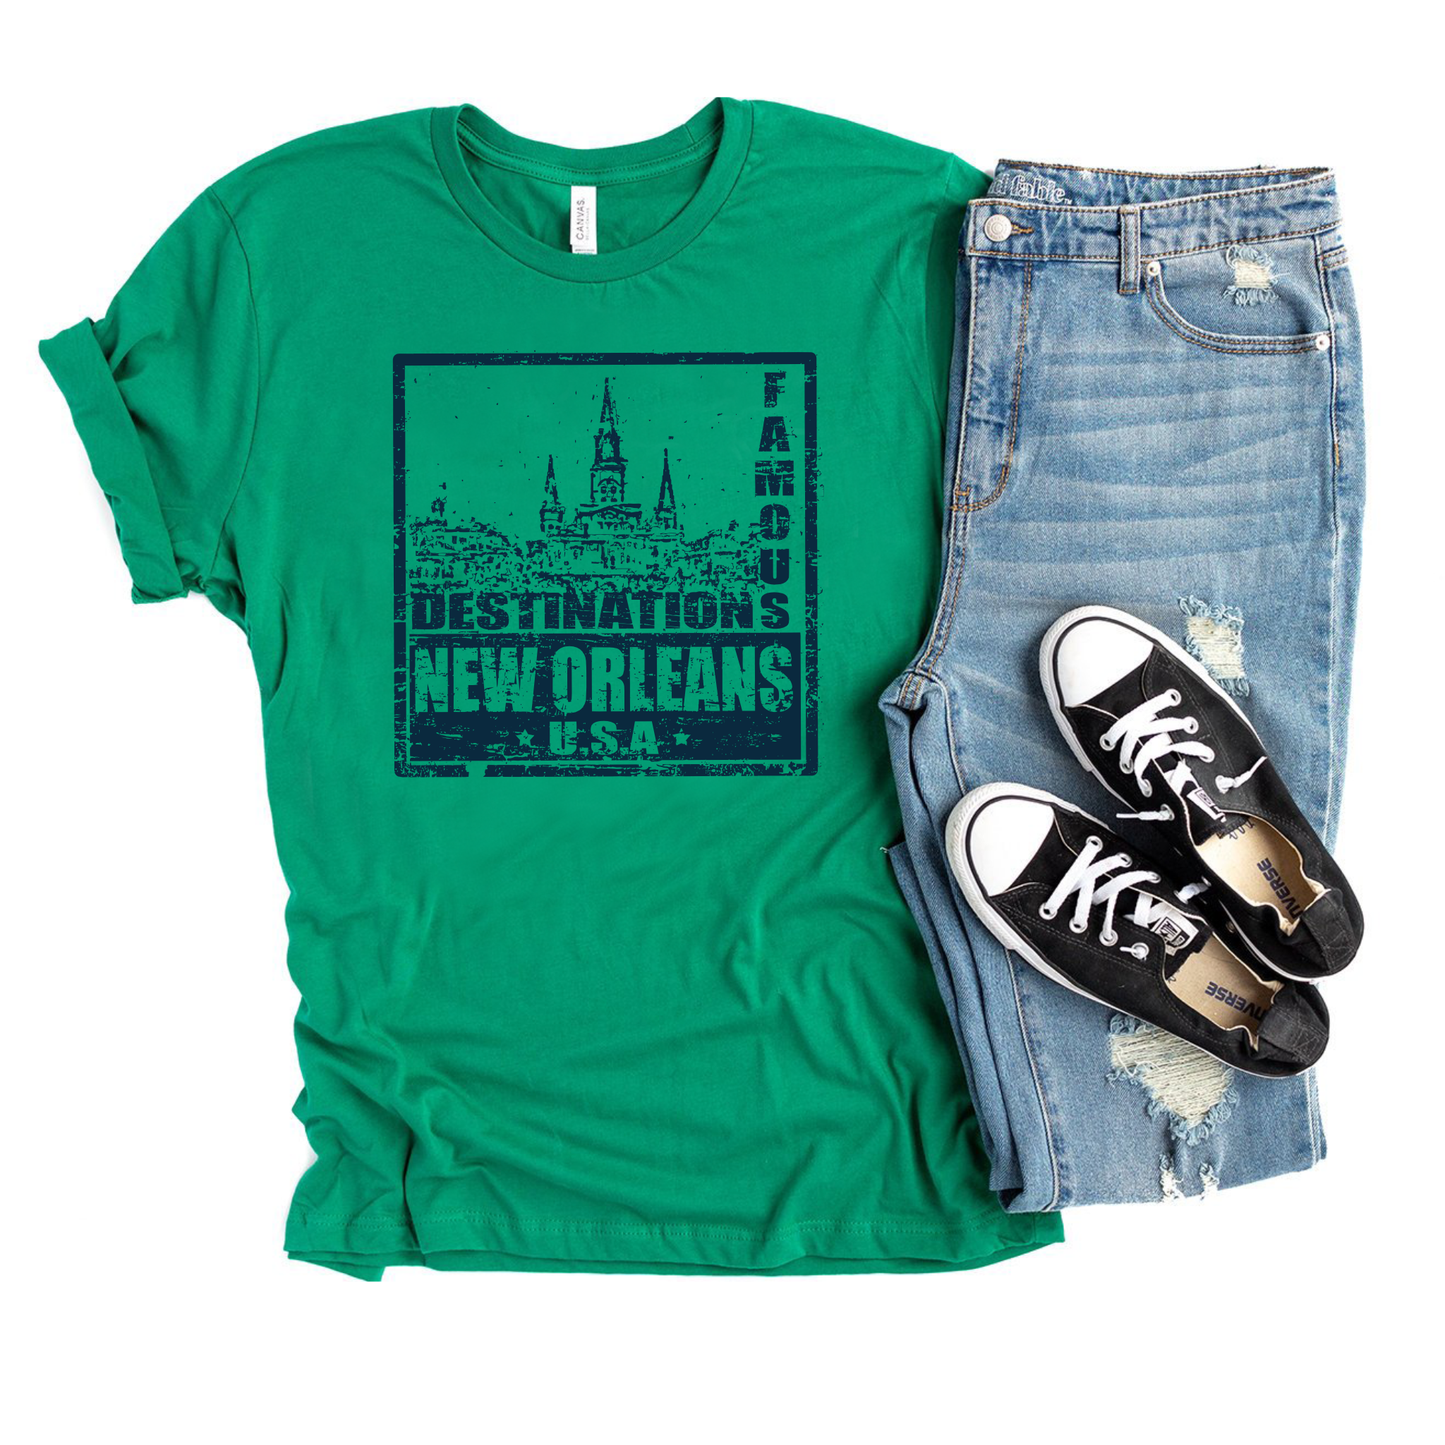 Famous New Orleans Stamp Tee